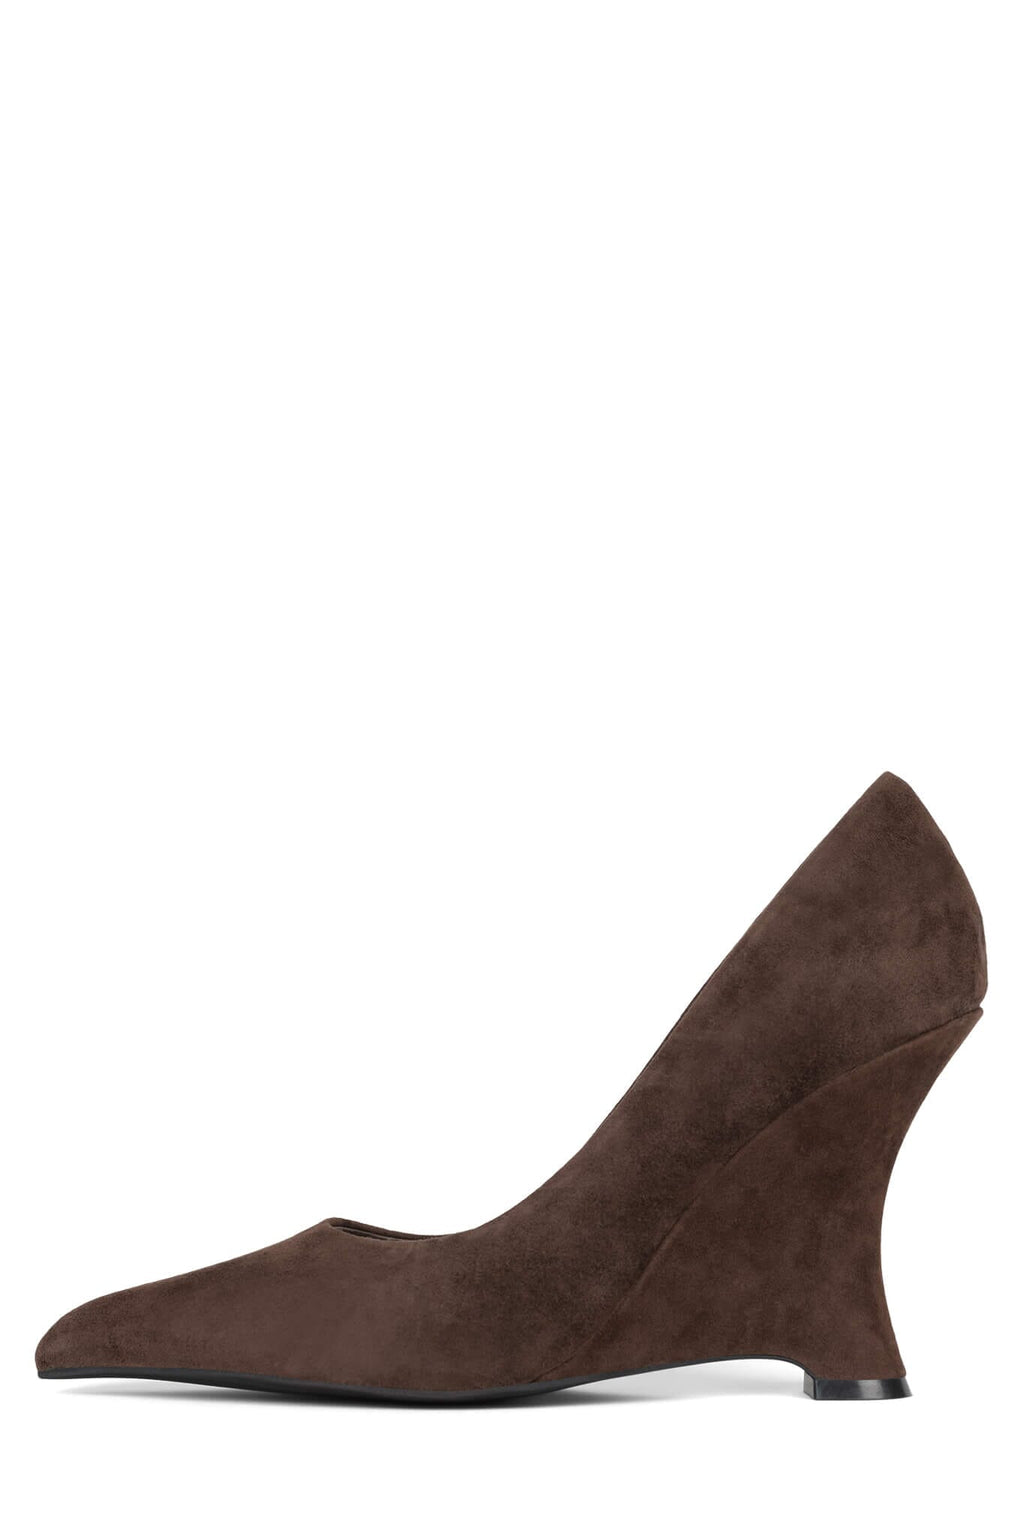 INTRIGUED ST Brown Suede 6 